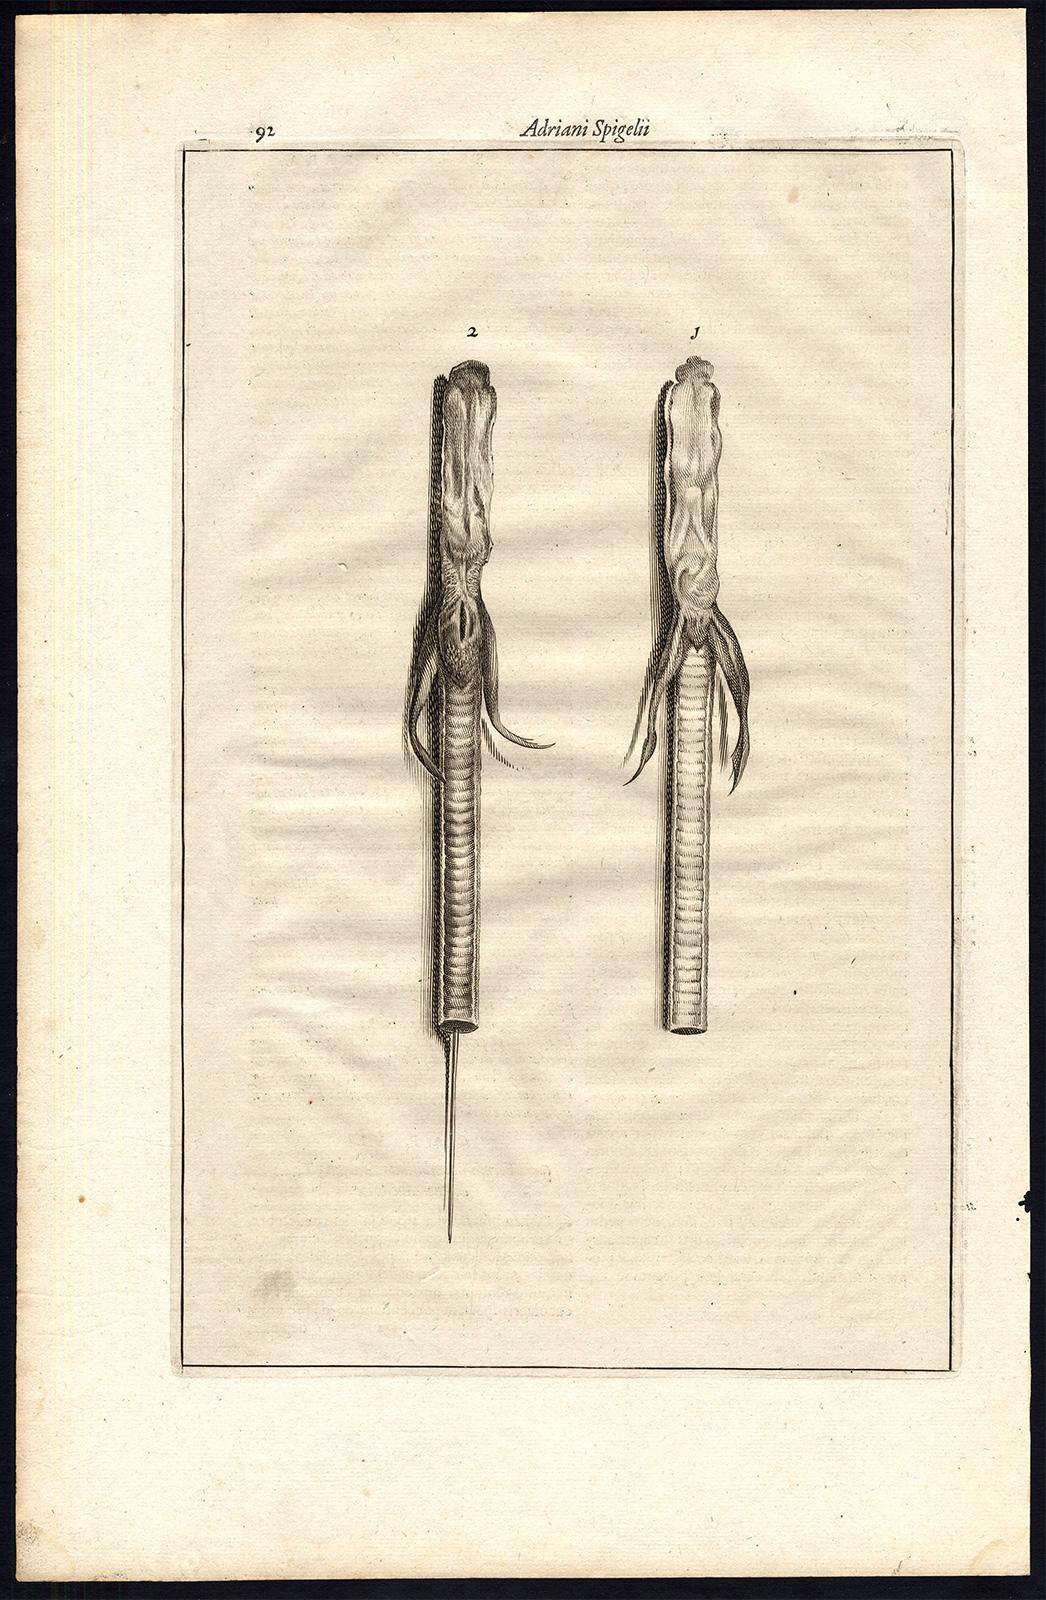 Subject: Very rare anatomical print. Plate, Tab. 88/89 & 92. Set of 2 plates, with the corresponding text, titled: 